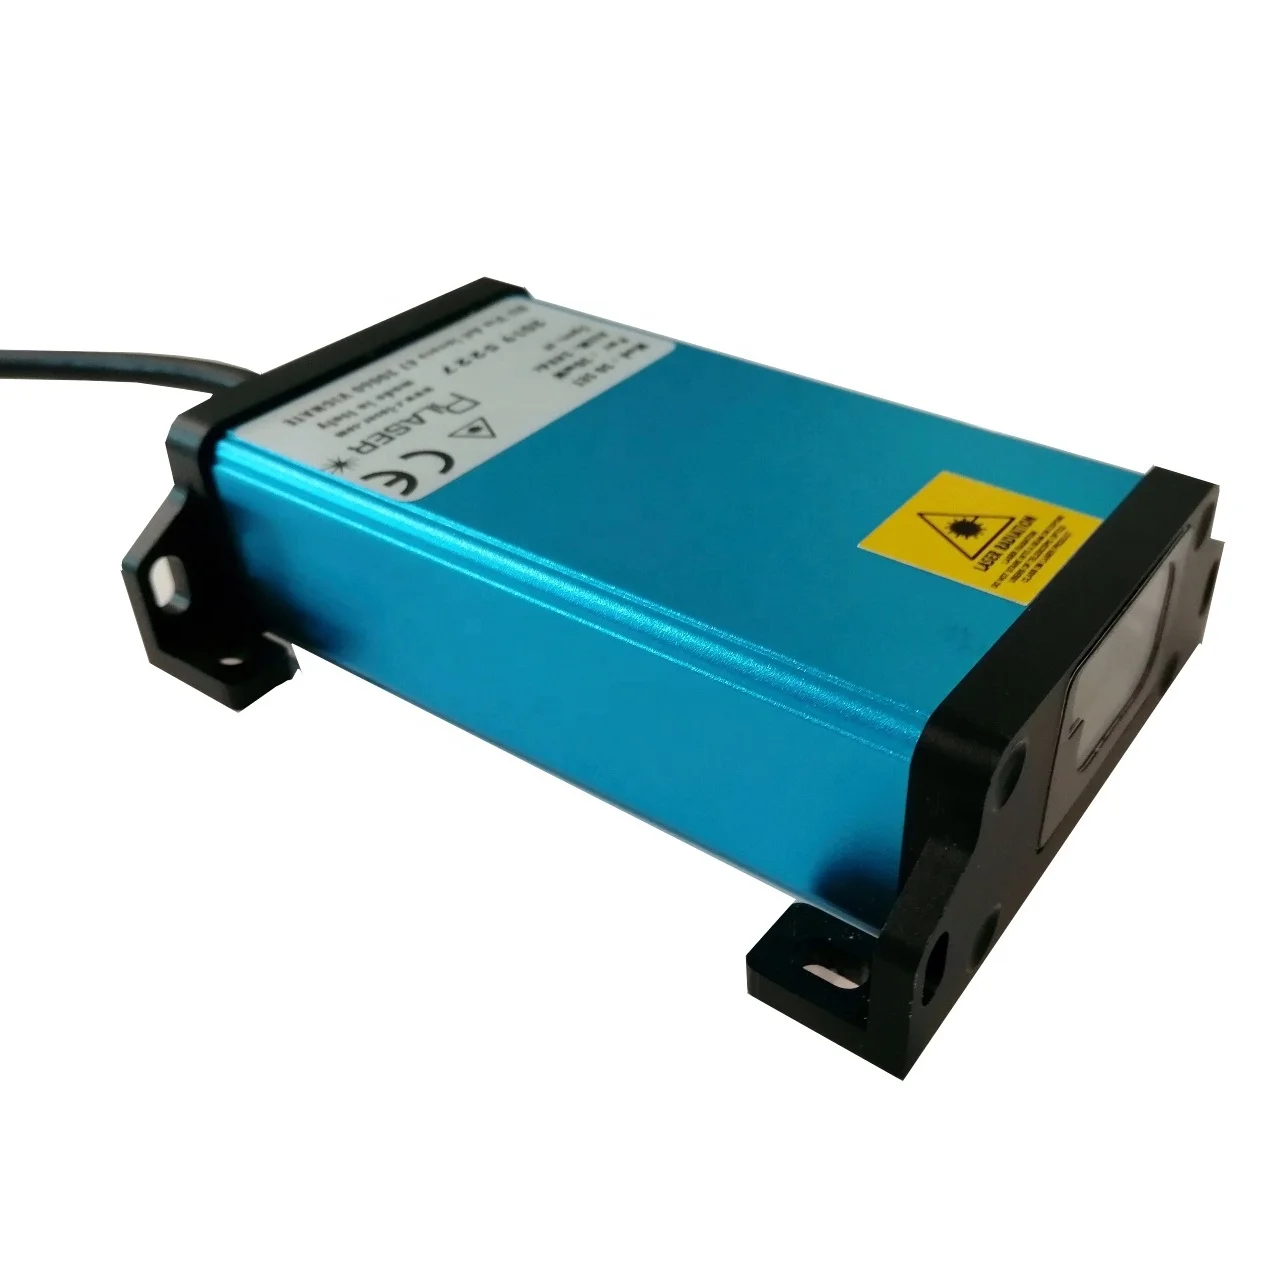 work temperature   20C to 60C  high resolution  20m Laser distance meter RS232  interface for liquid level measuring